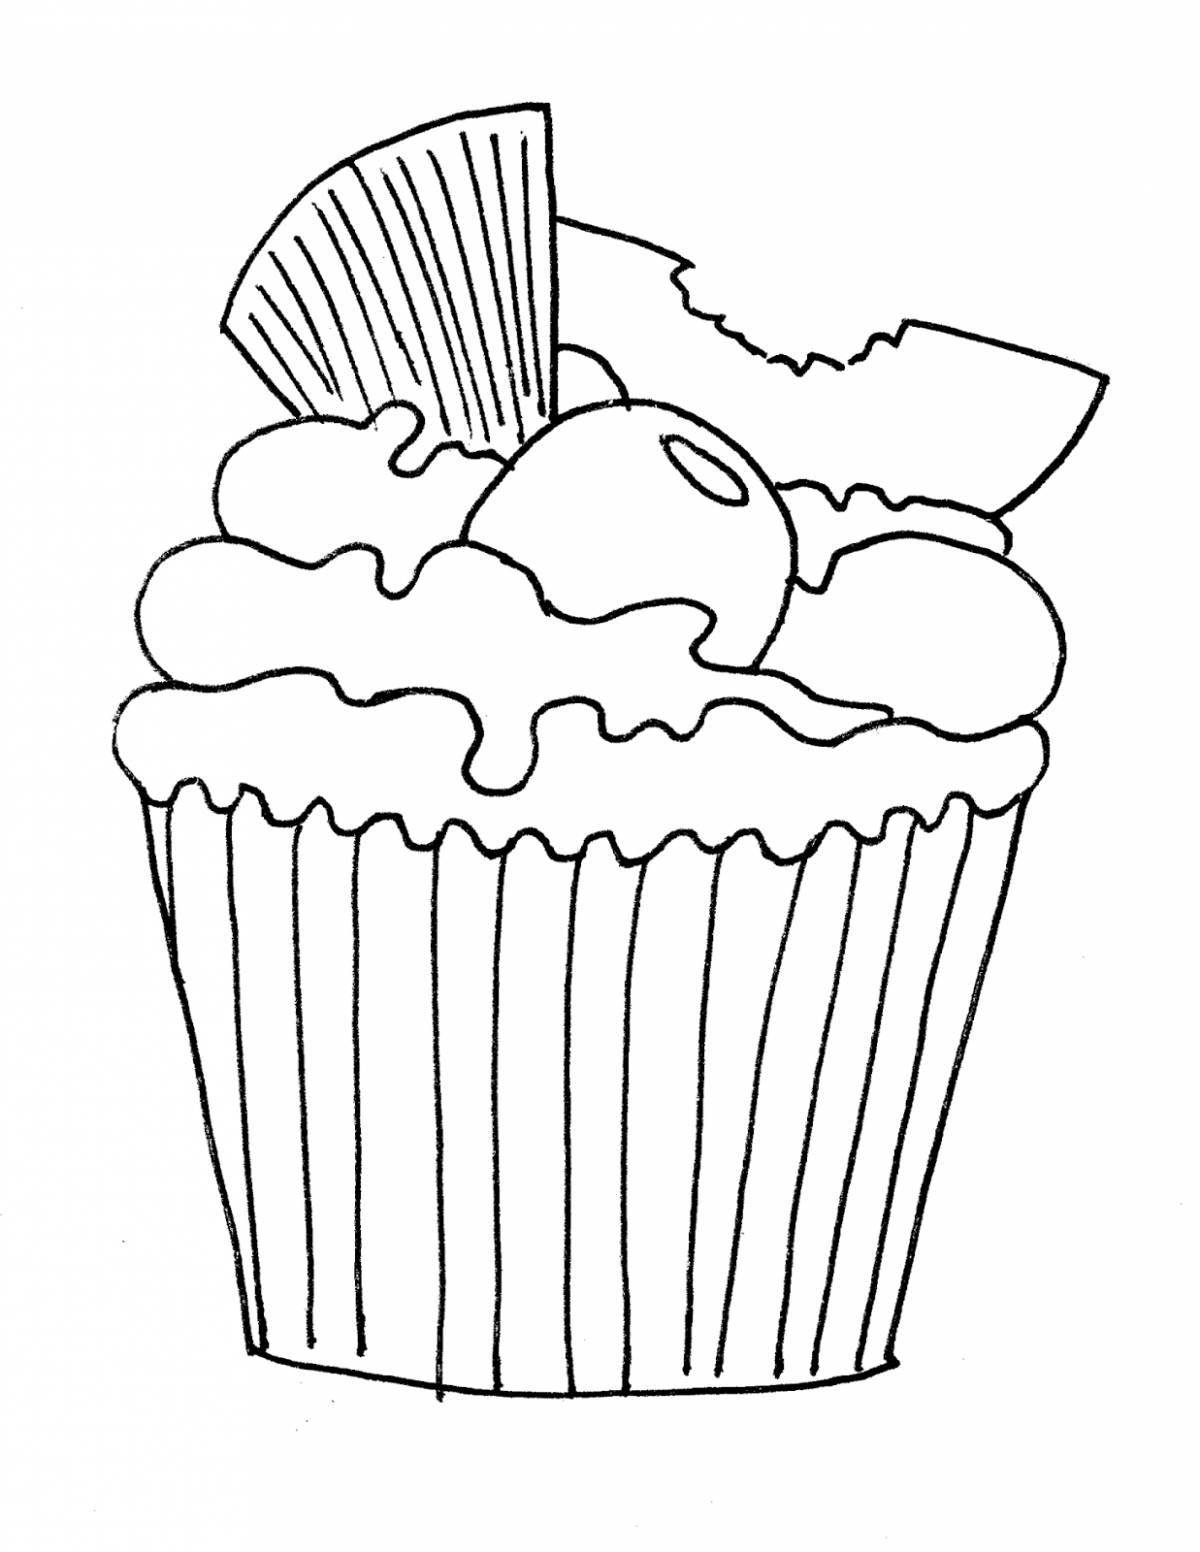 Fancy cupcake coloring pages for kids